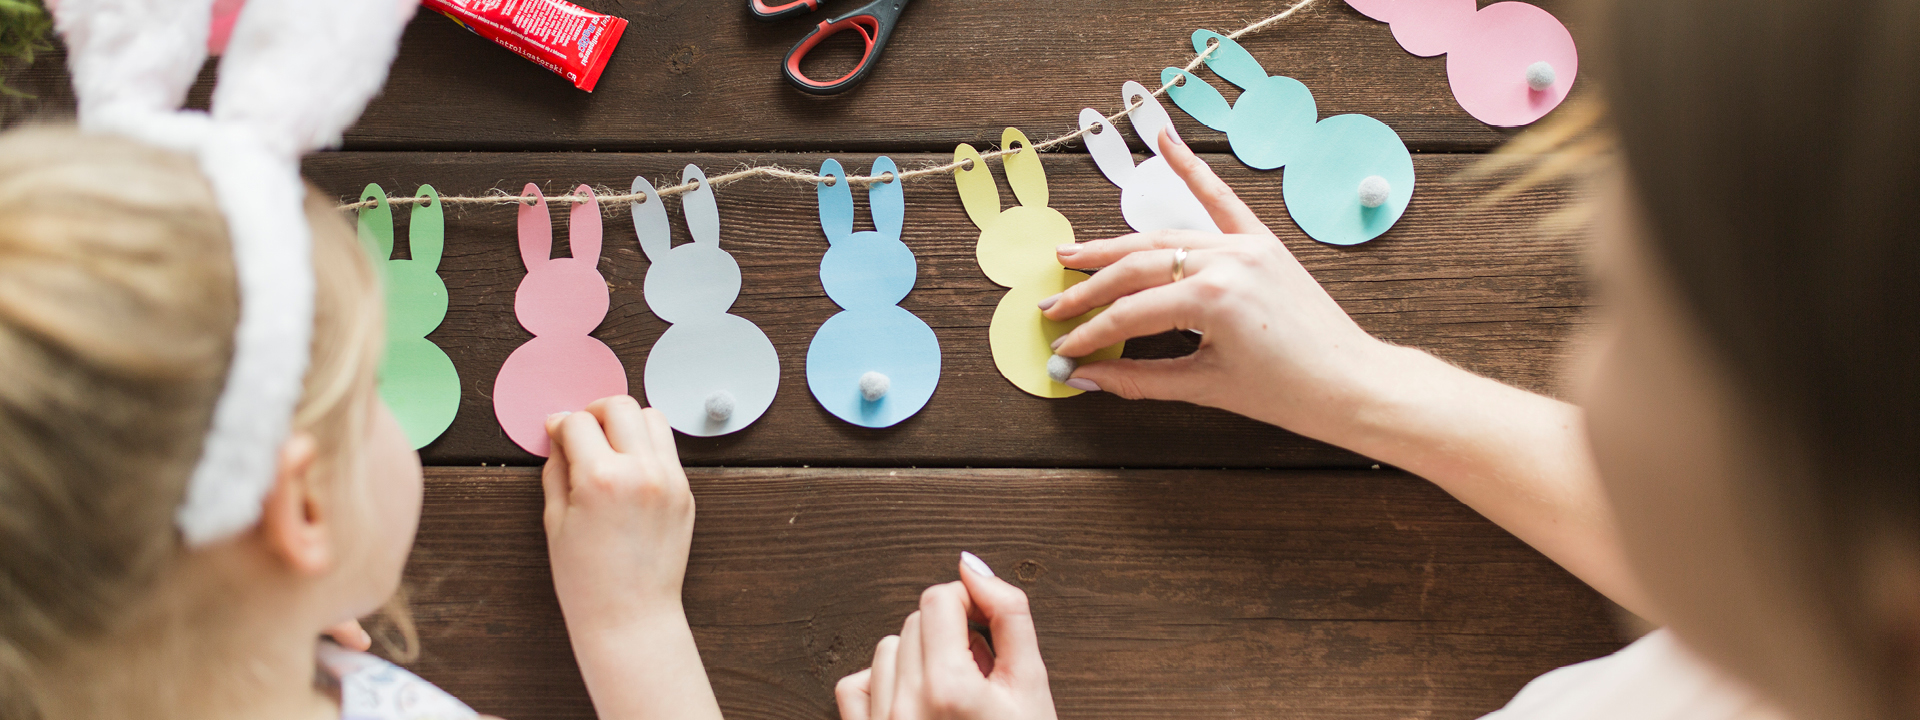 Creative craft ideas to do with children for Easter